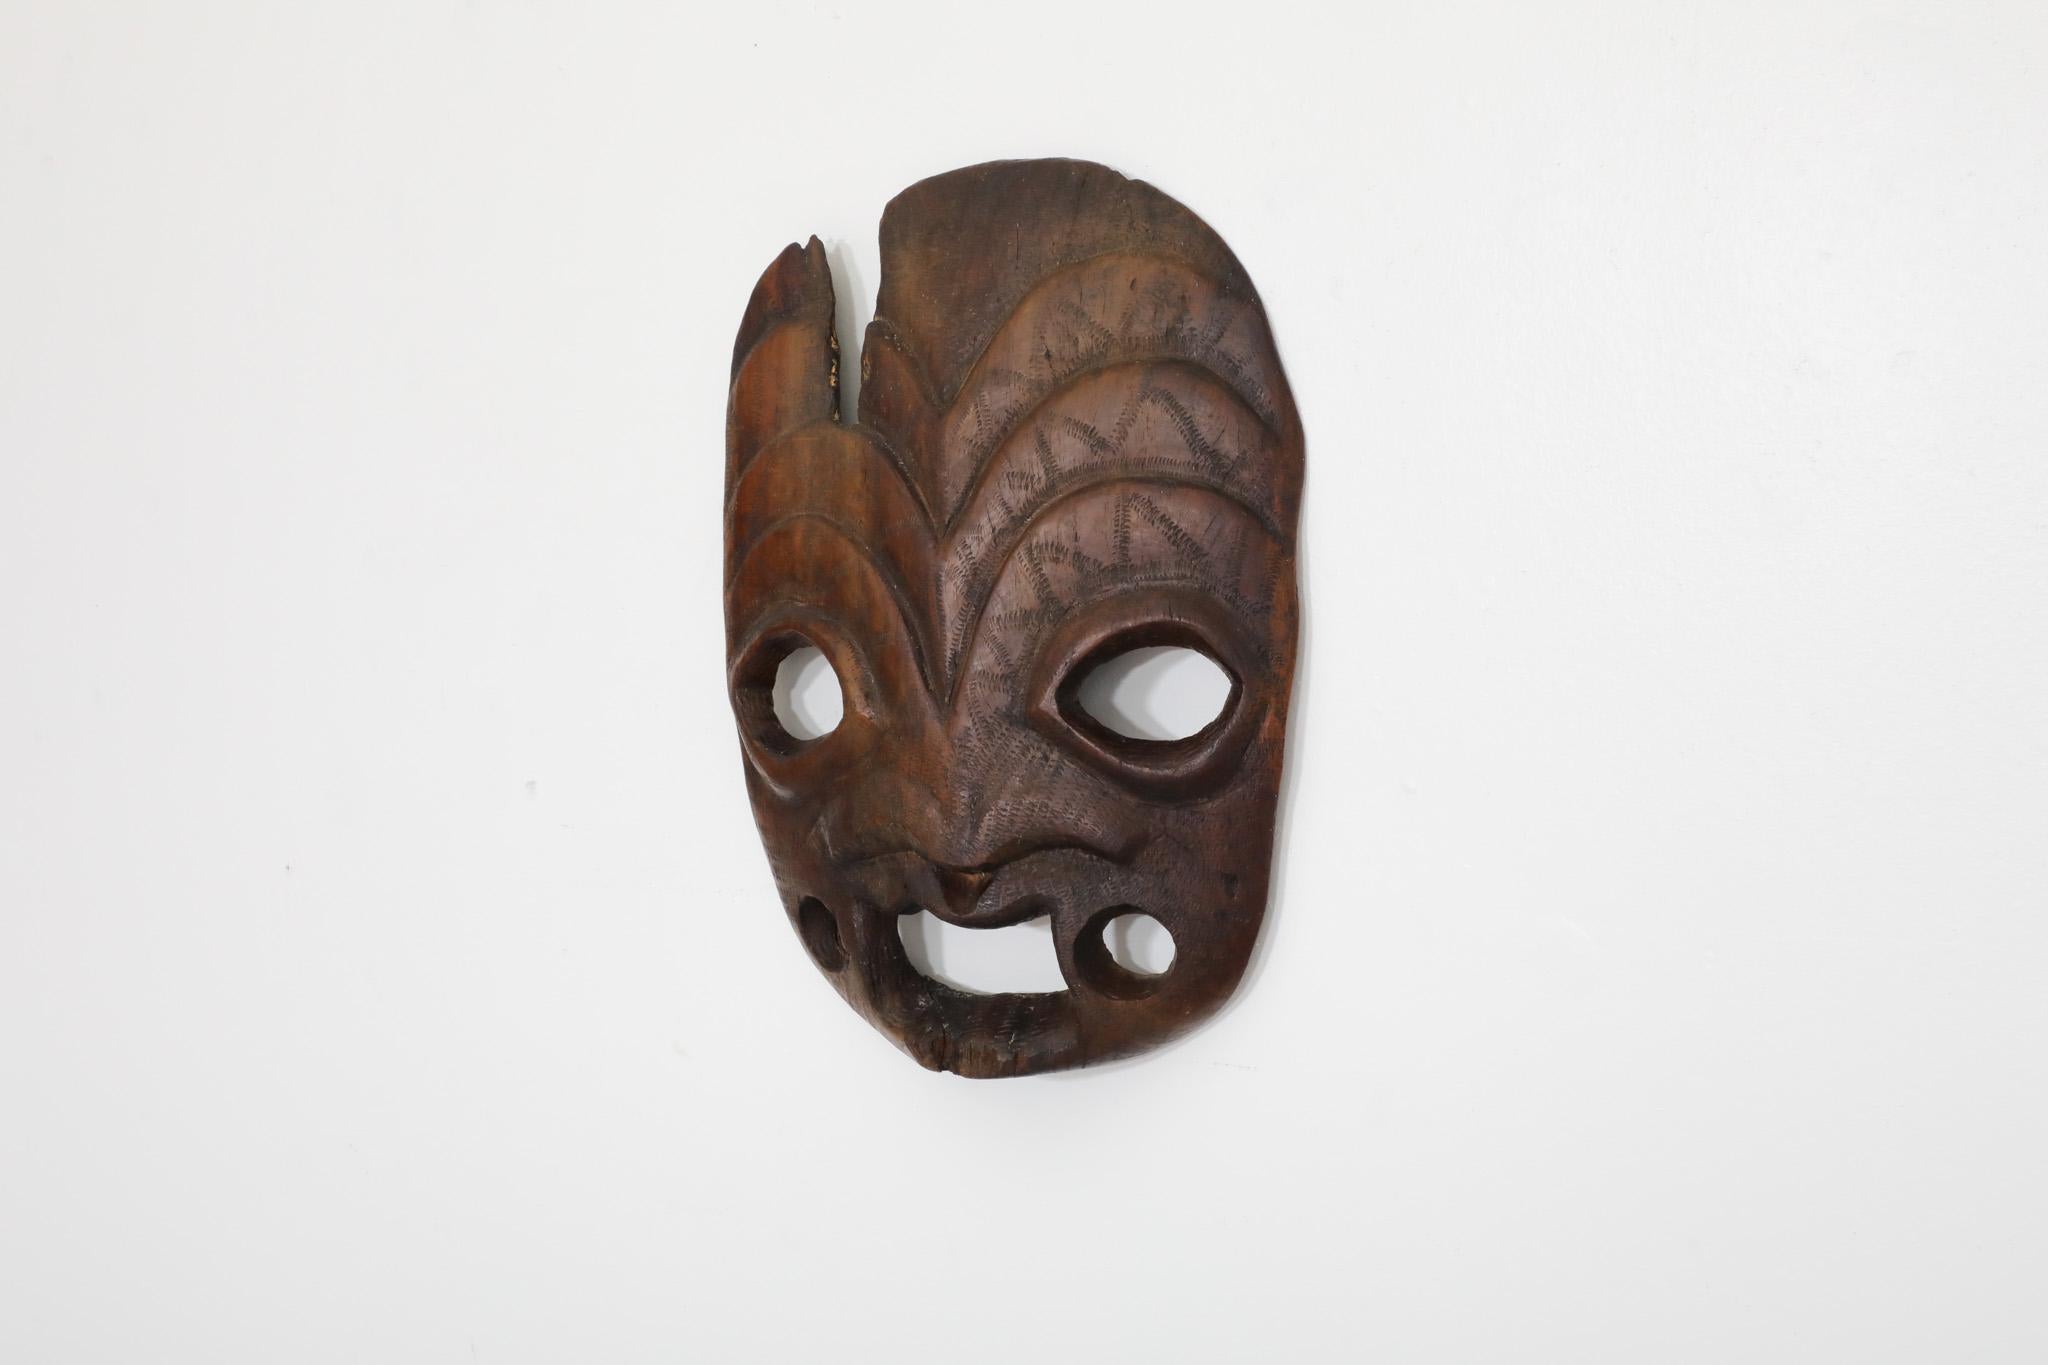 Antique, possibly Maori hand carved solid oak tribal mask. Not much known about the piece's provenance but it's breath taking nonetheless. In original condition with visible wear consistent with its age and use.